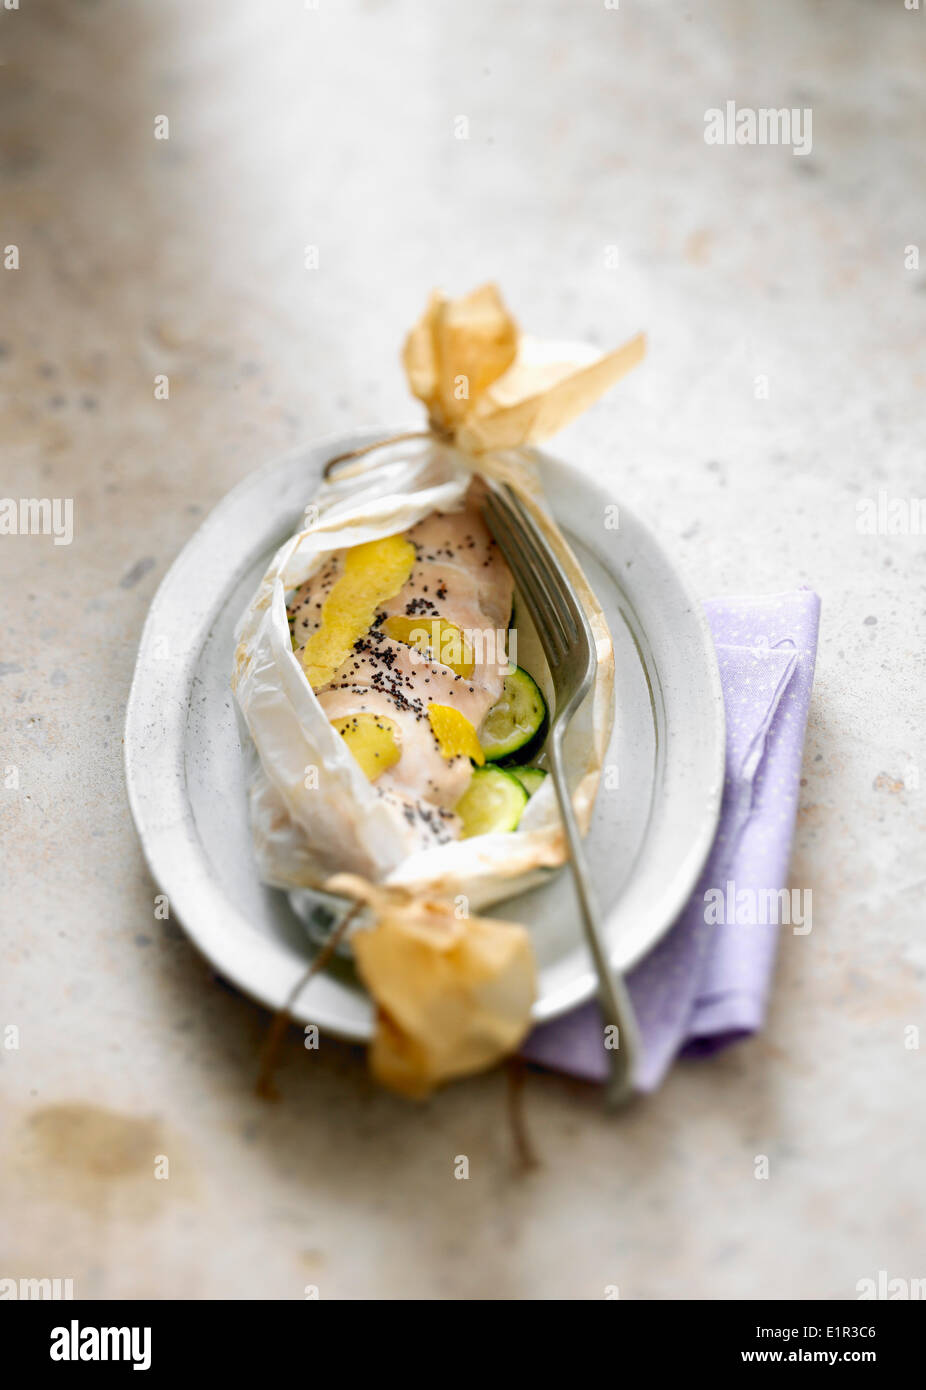 Chicken with poppy seeds cooked in wax paper Stock Photo